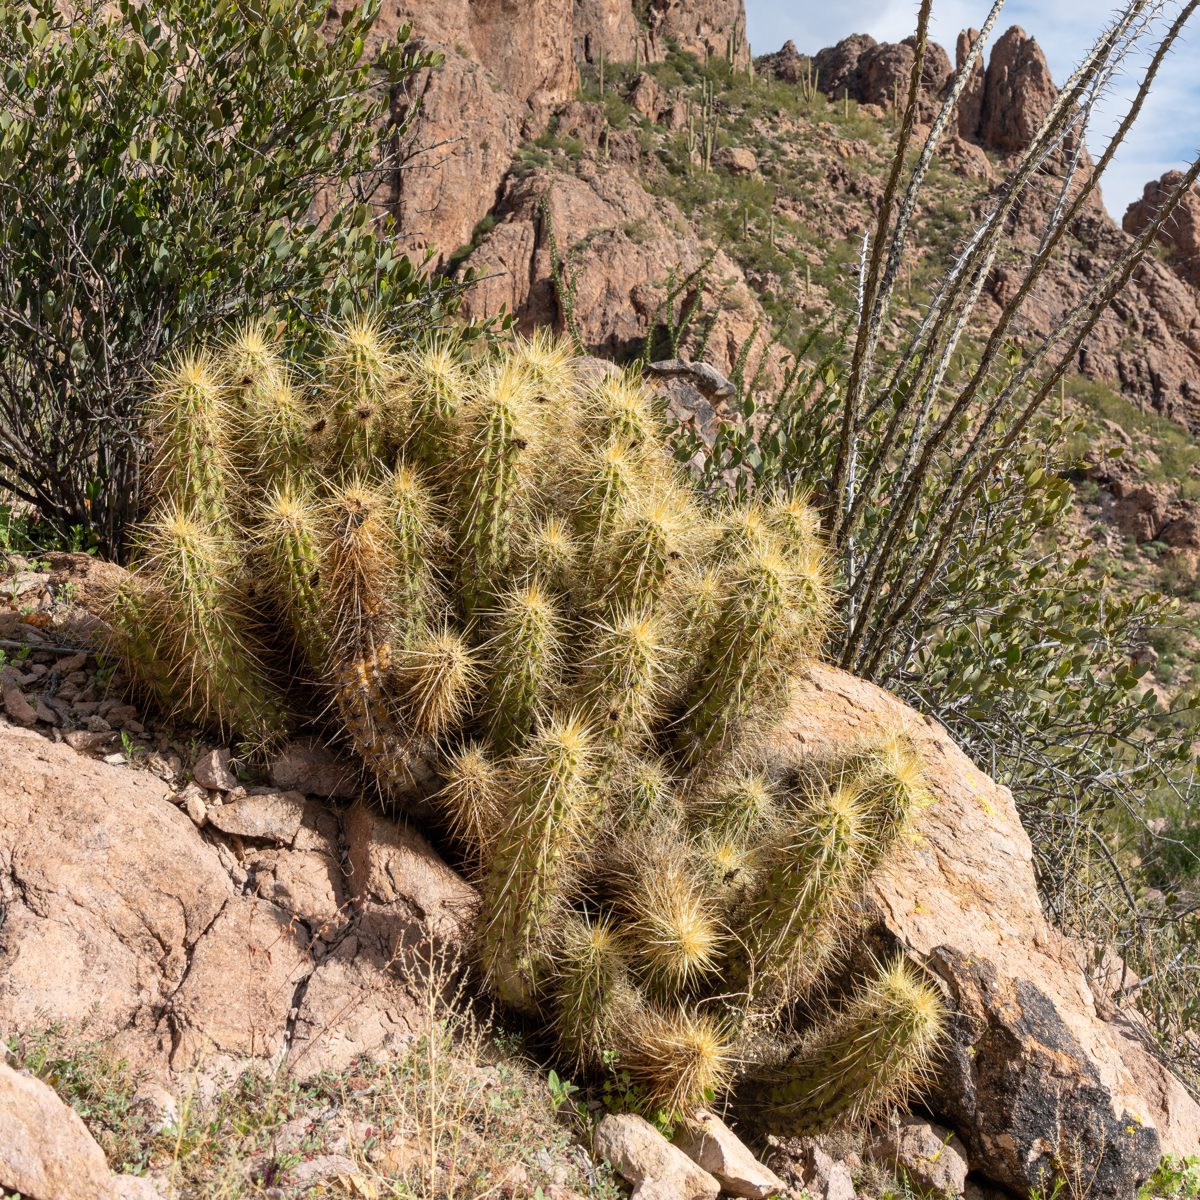 20+ columns of spined cactus emerge from the rock - a Golden Hedgehog on the slopes of Ragged Top.